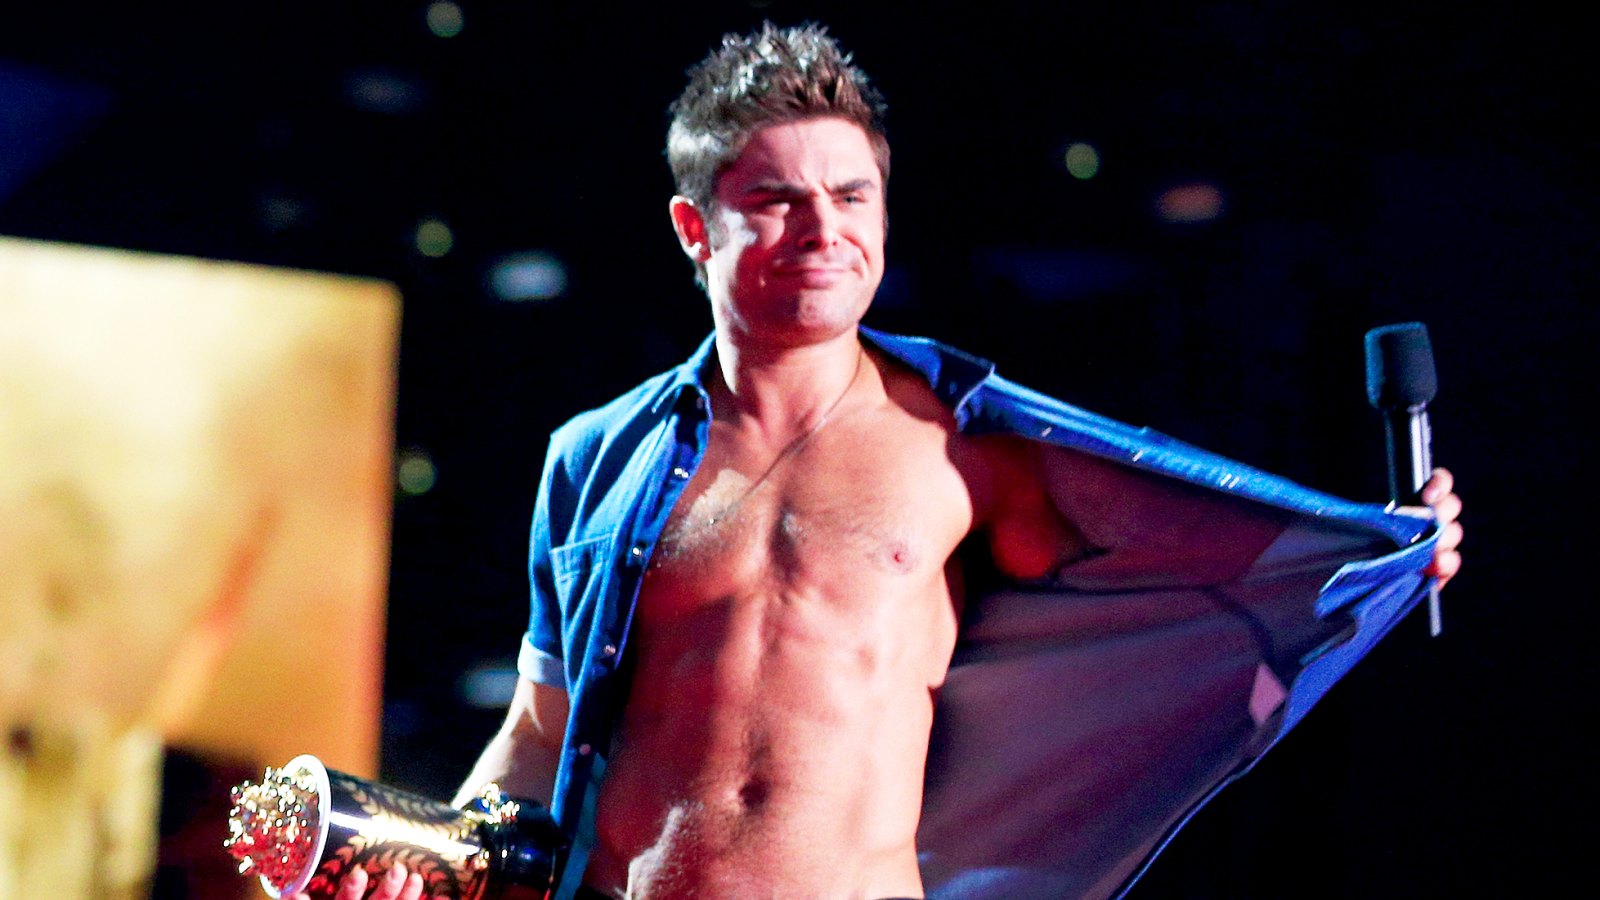 Zac Efron onstage at the 2014 MTV Movie Awards at Nokia Theatre L.A. Live in Los Angeles, California.